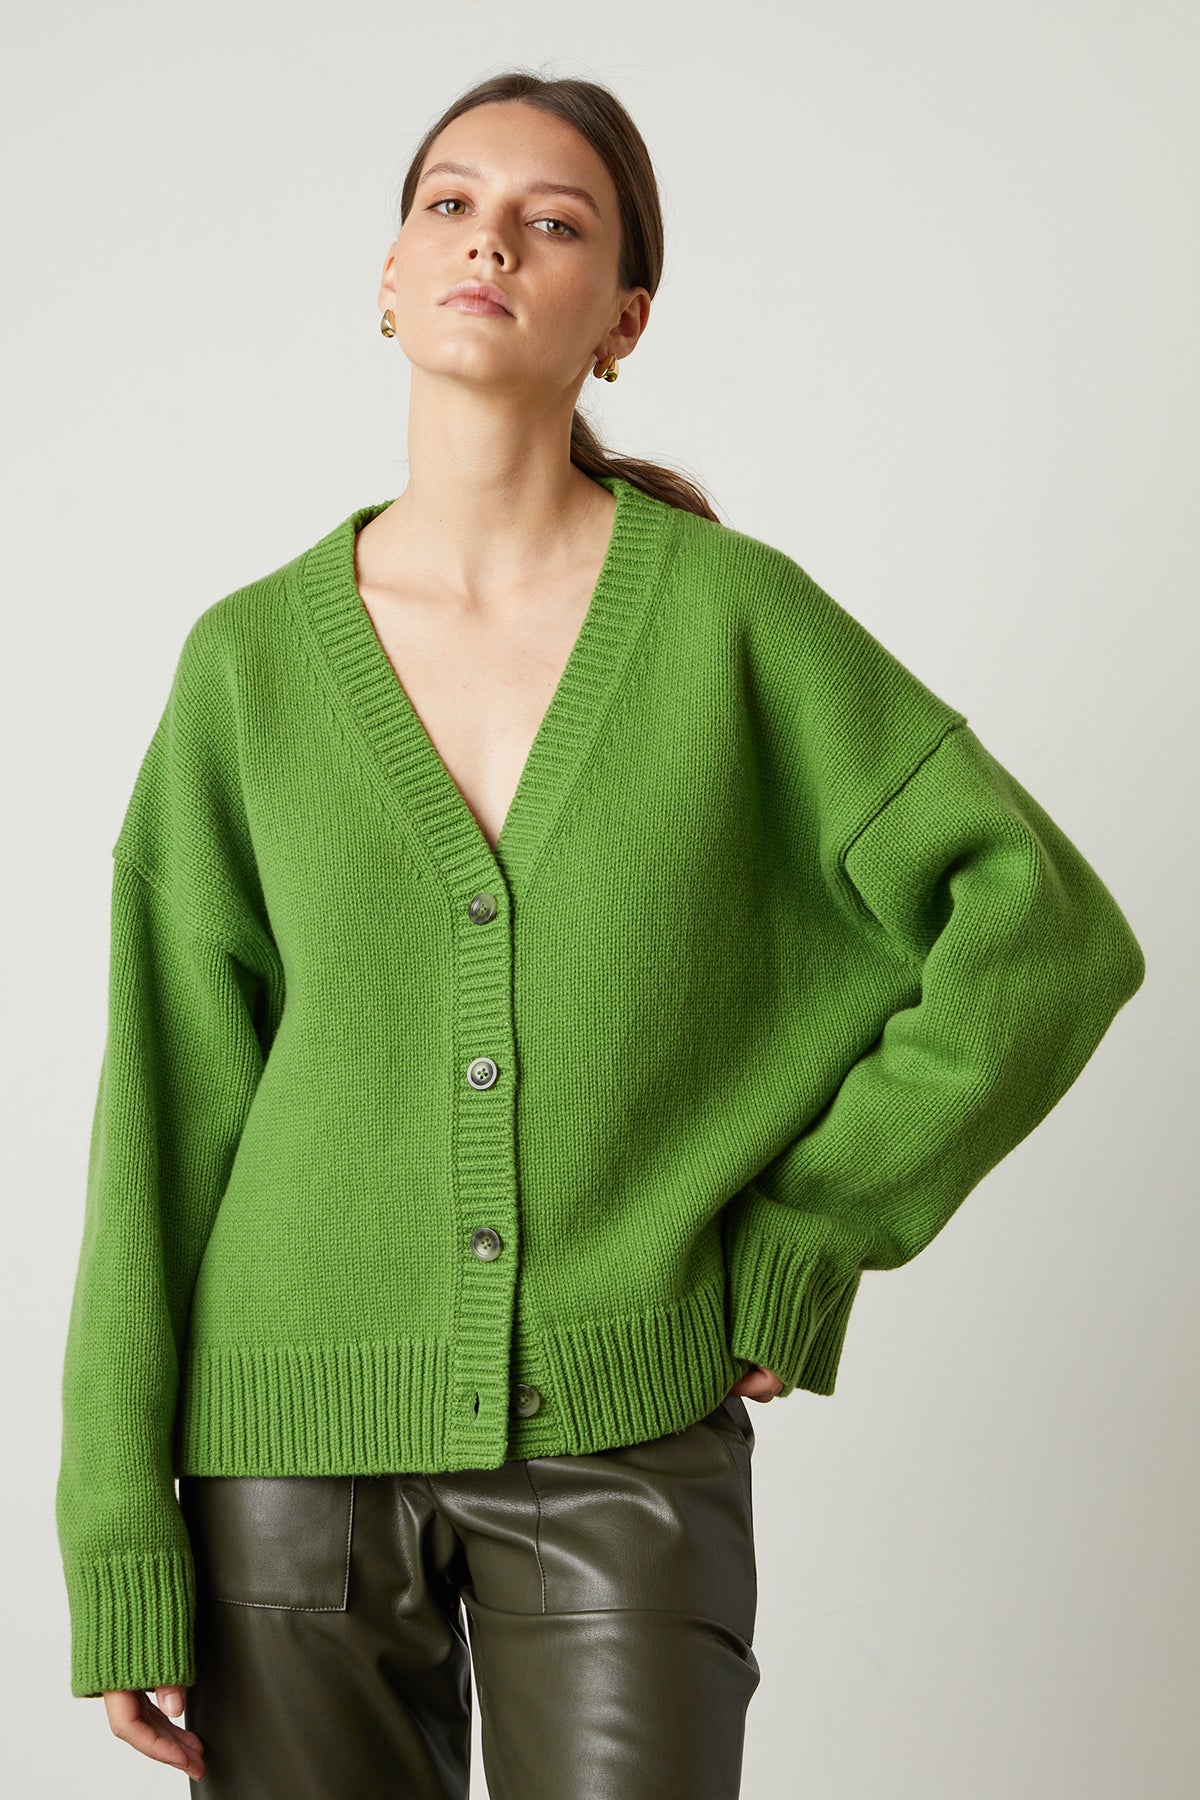 Aurora Button Front Cardigan in vibrant aloe green front with Rihanna Jogger -25668302766273